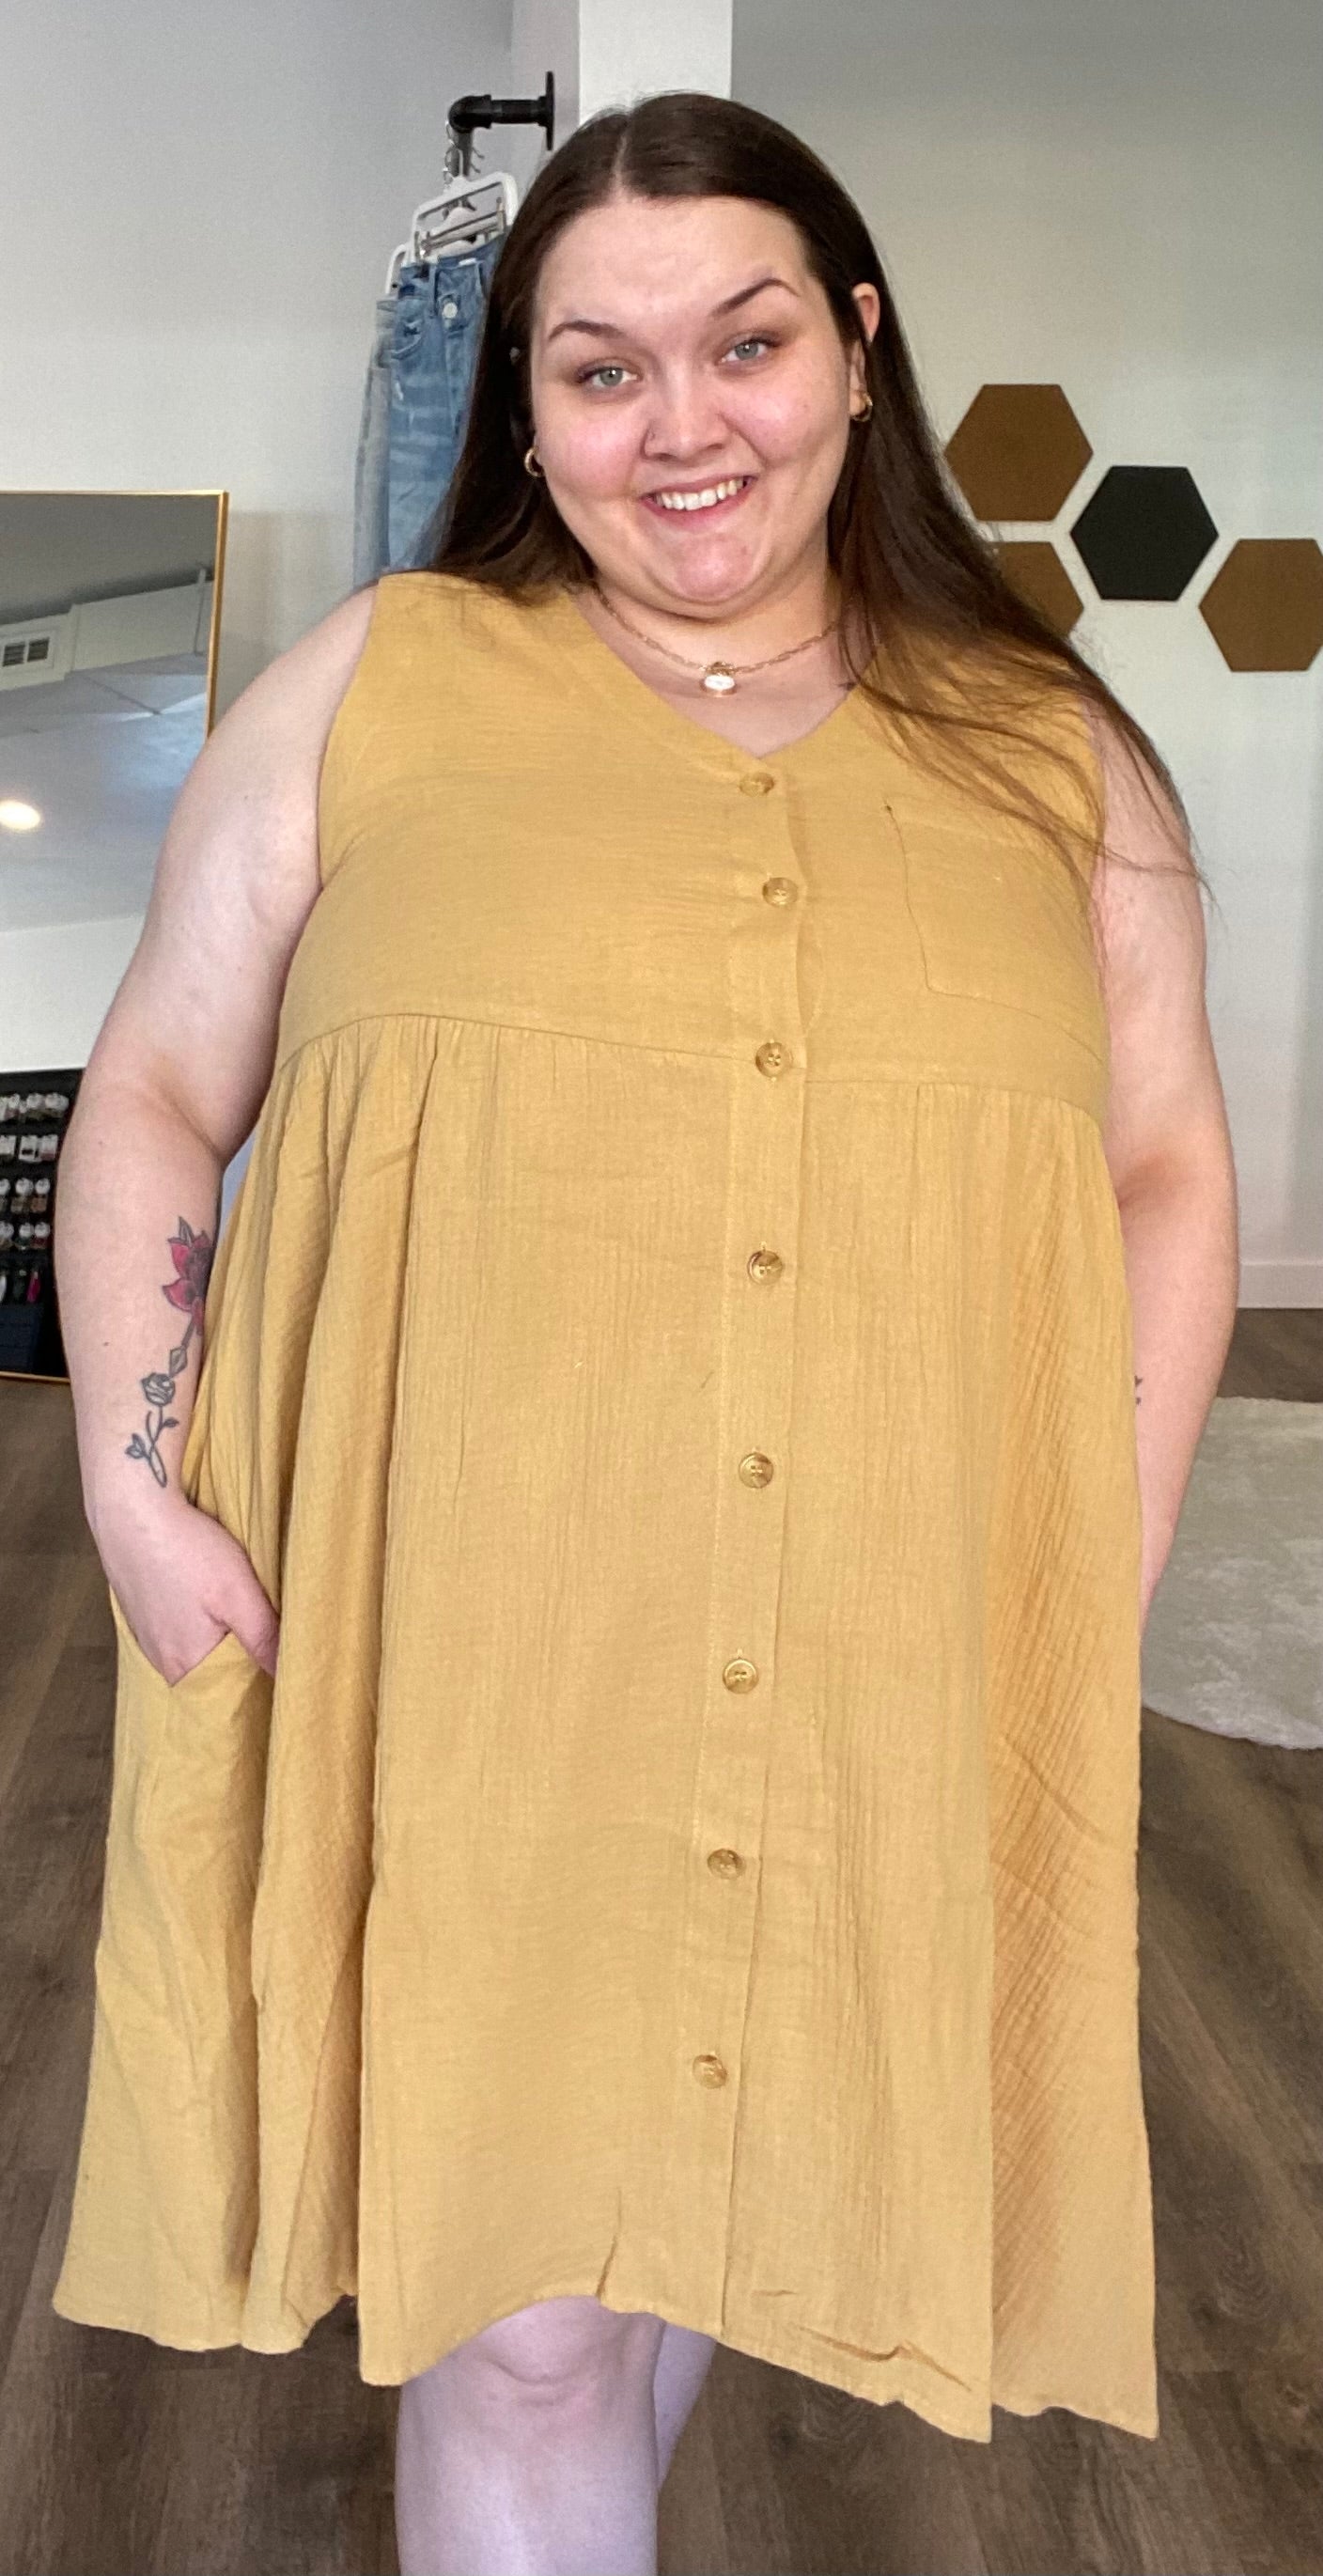 Shop Juniper Button-Down Dress with Pockets-Dresses at Ruby Joy Boutique, a Women's Clothing Store in Pickerington, Ohio